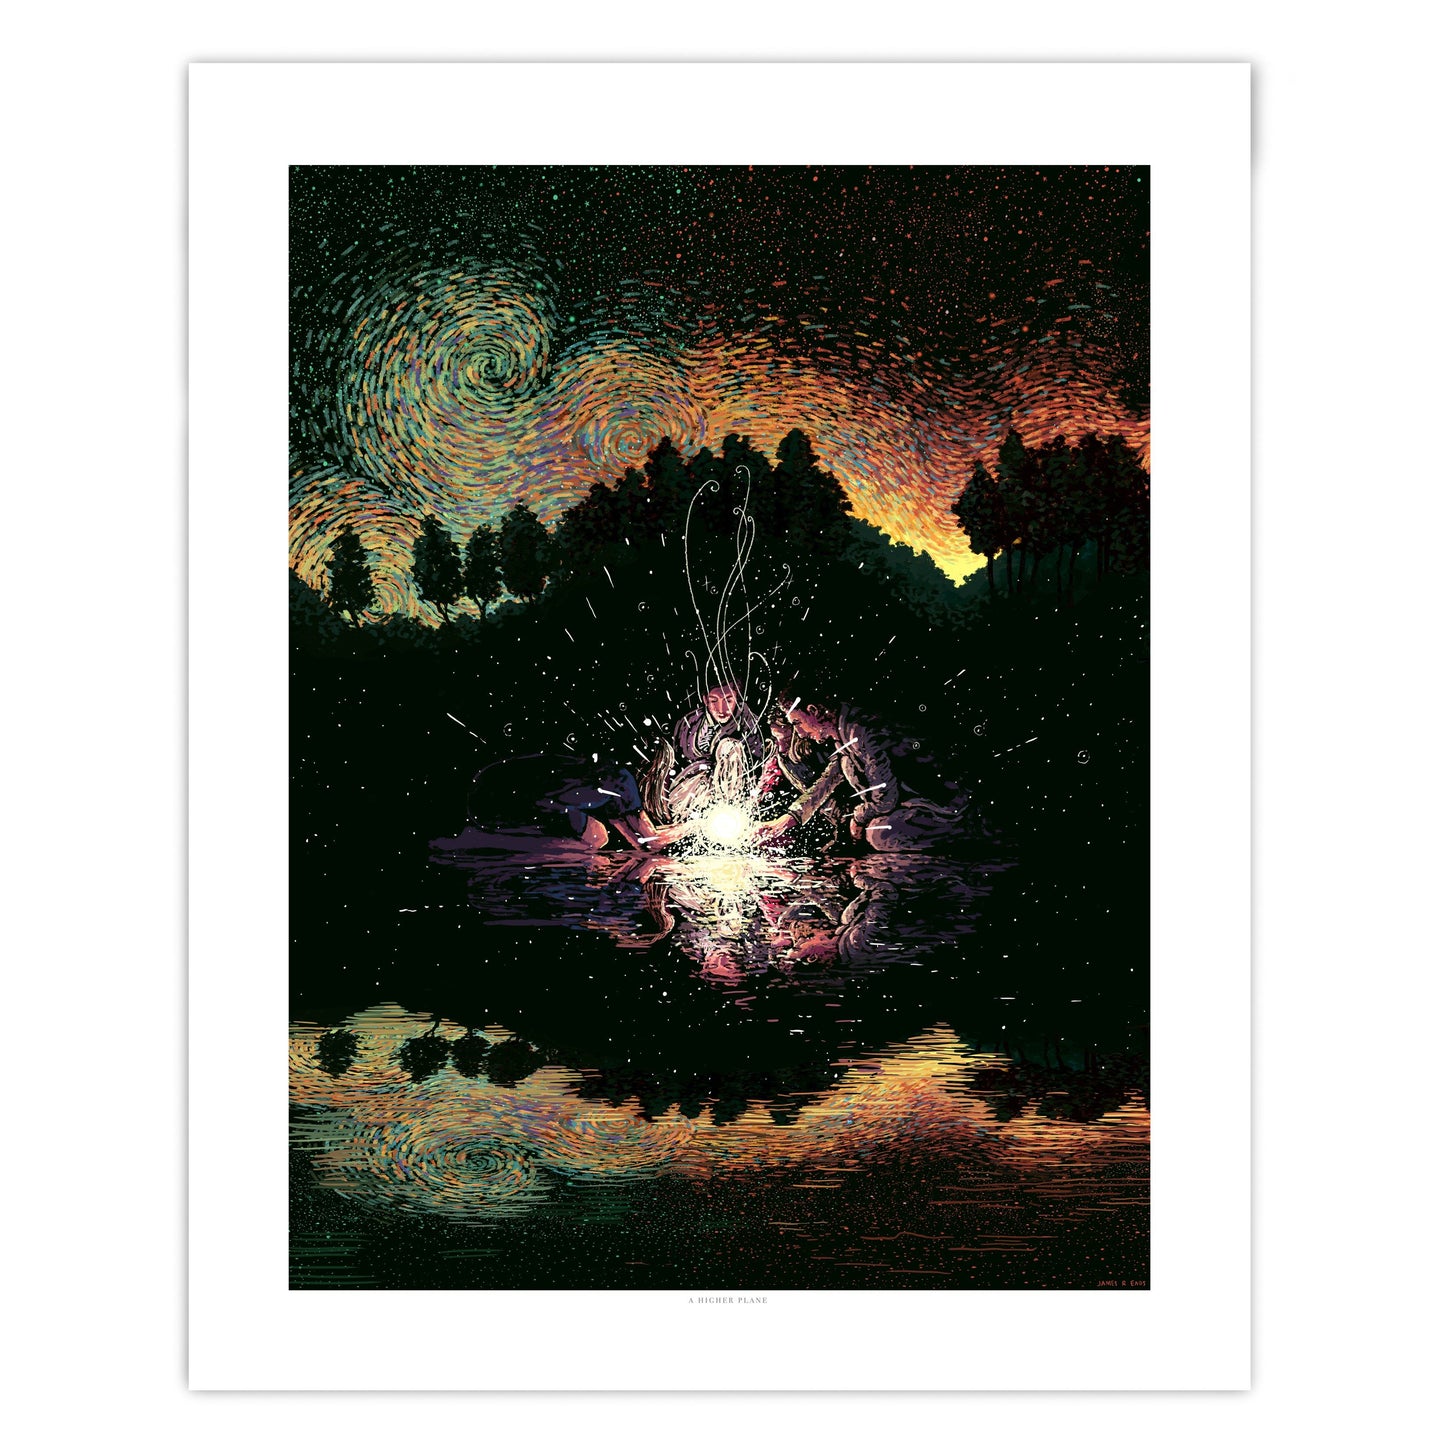 A Higher Plane (Limited Edition of 250) Print James R. Eads